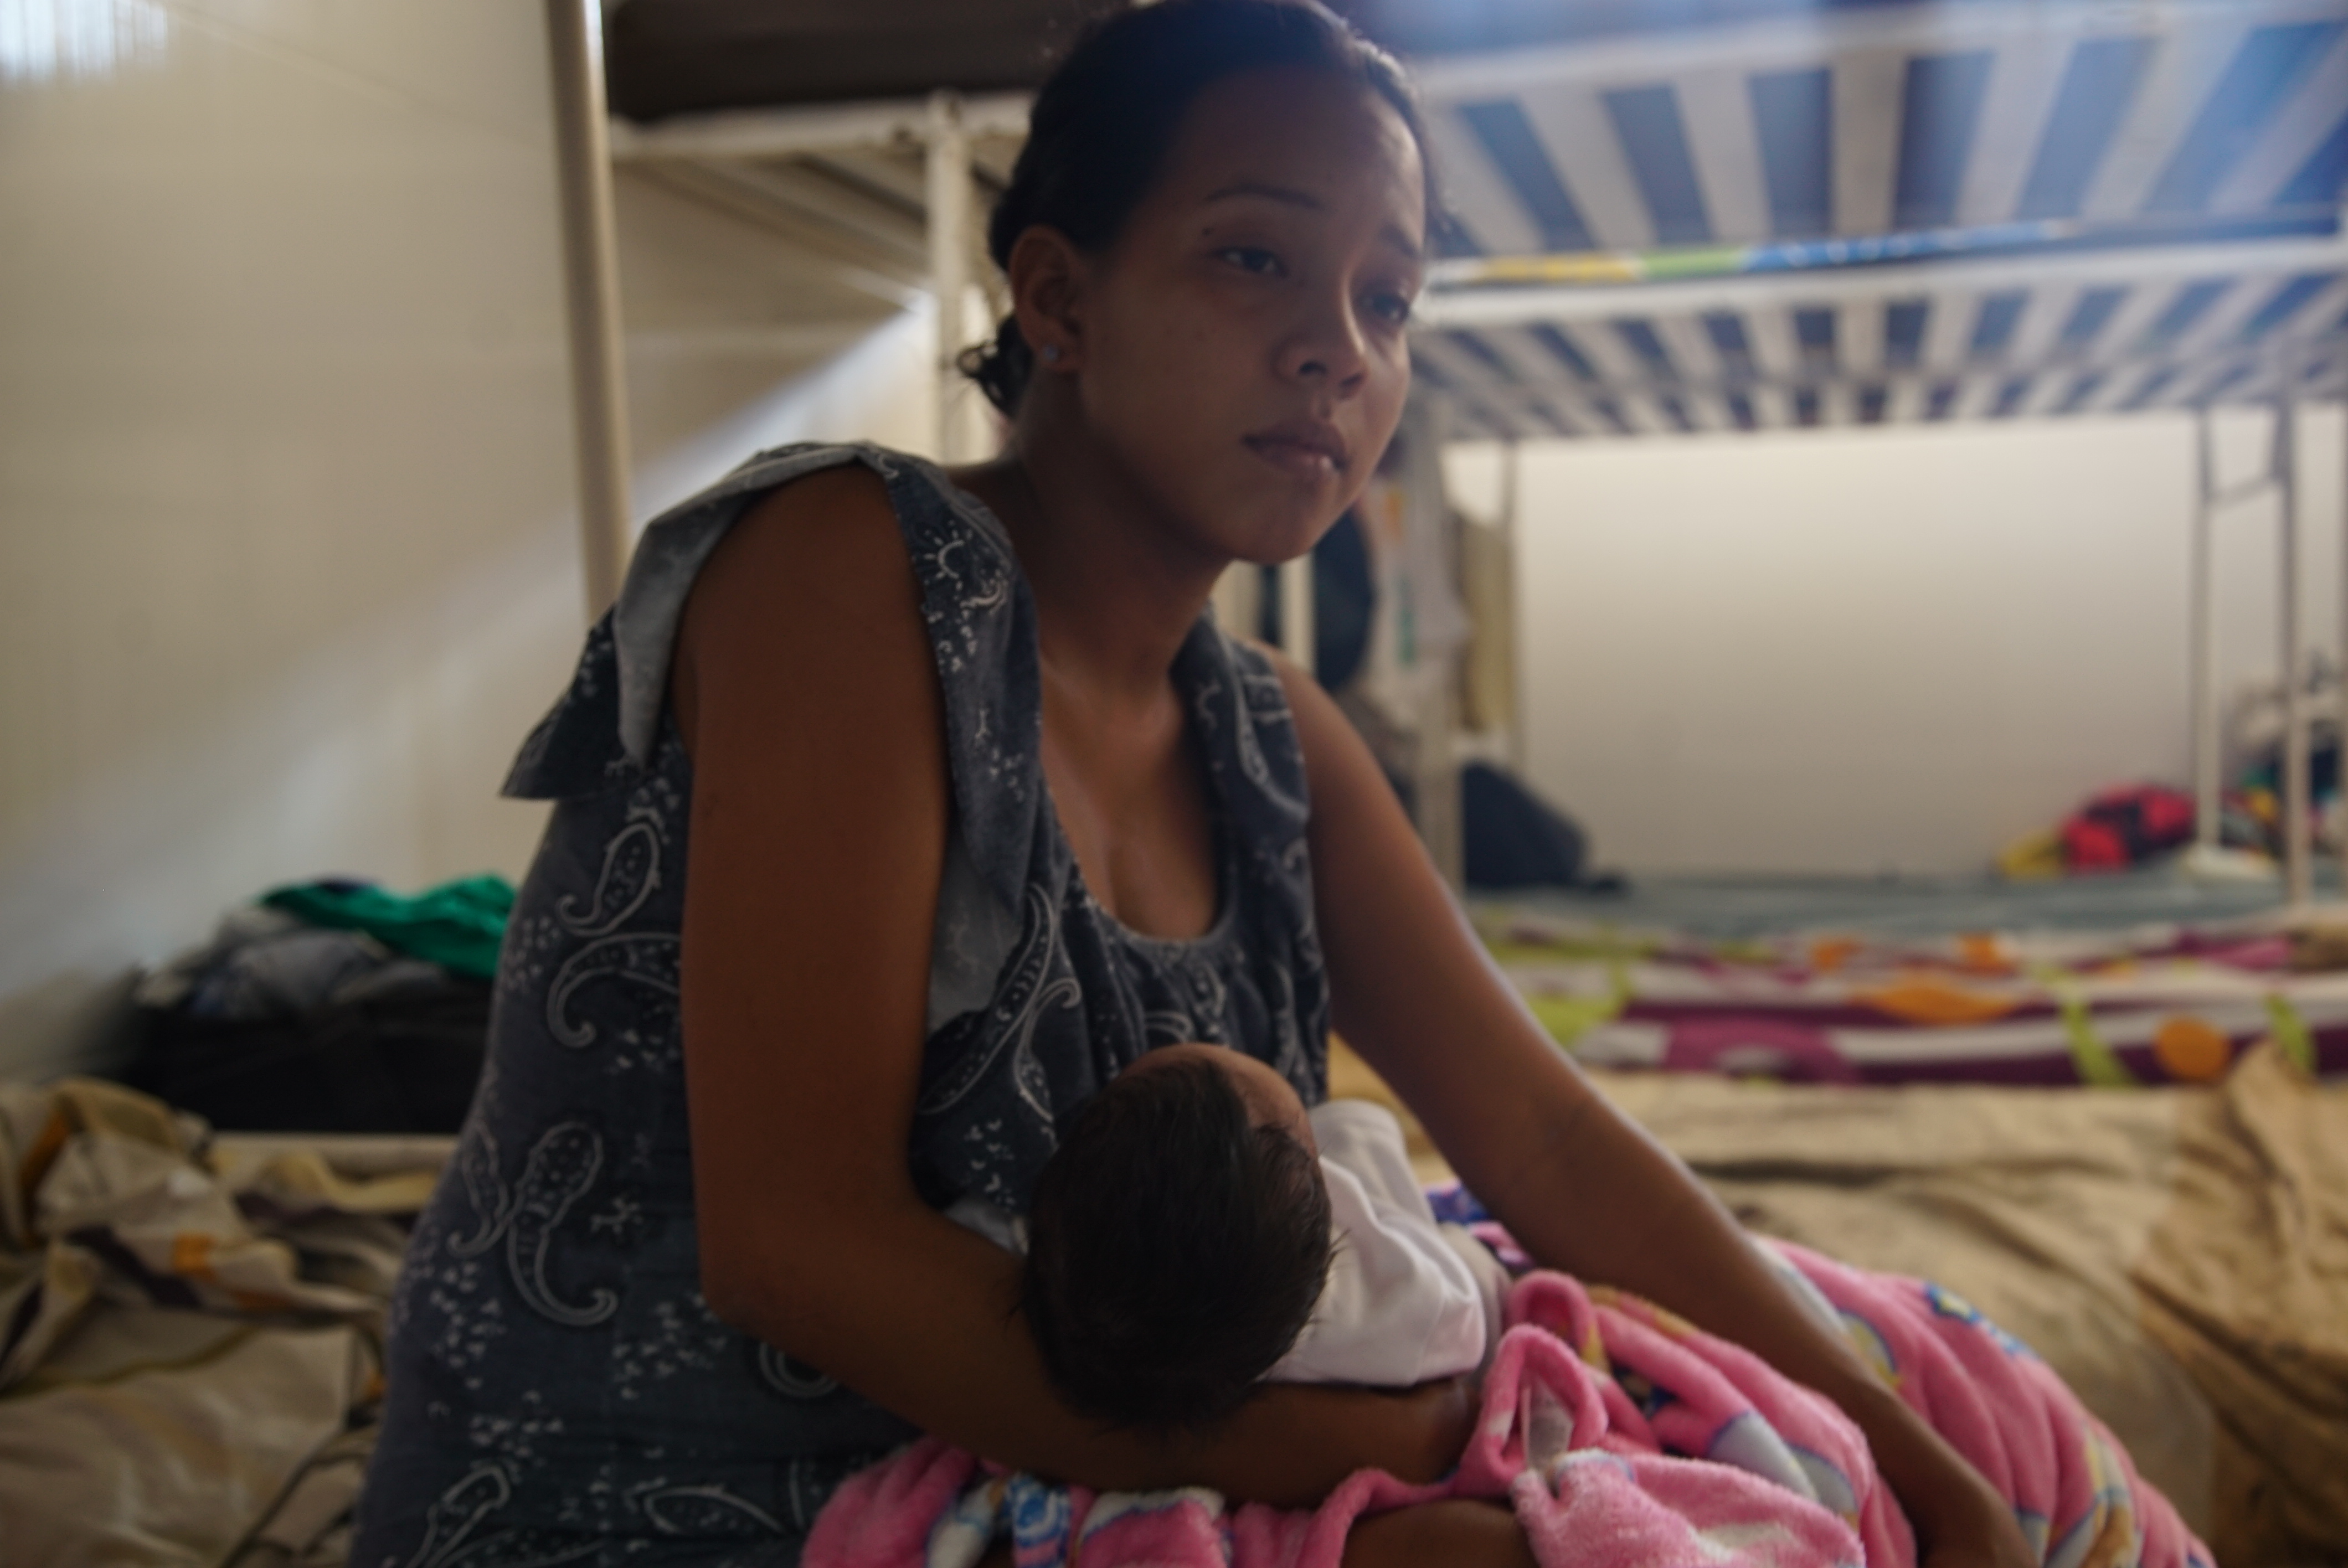 Jenny holds her newborn on her bed in the Scalabrini-run migrant shelter in Cucuta. Photo by Antonio De Loera-Brust